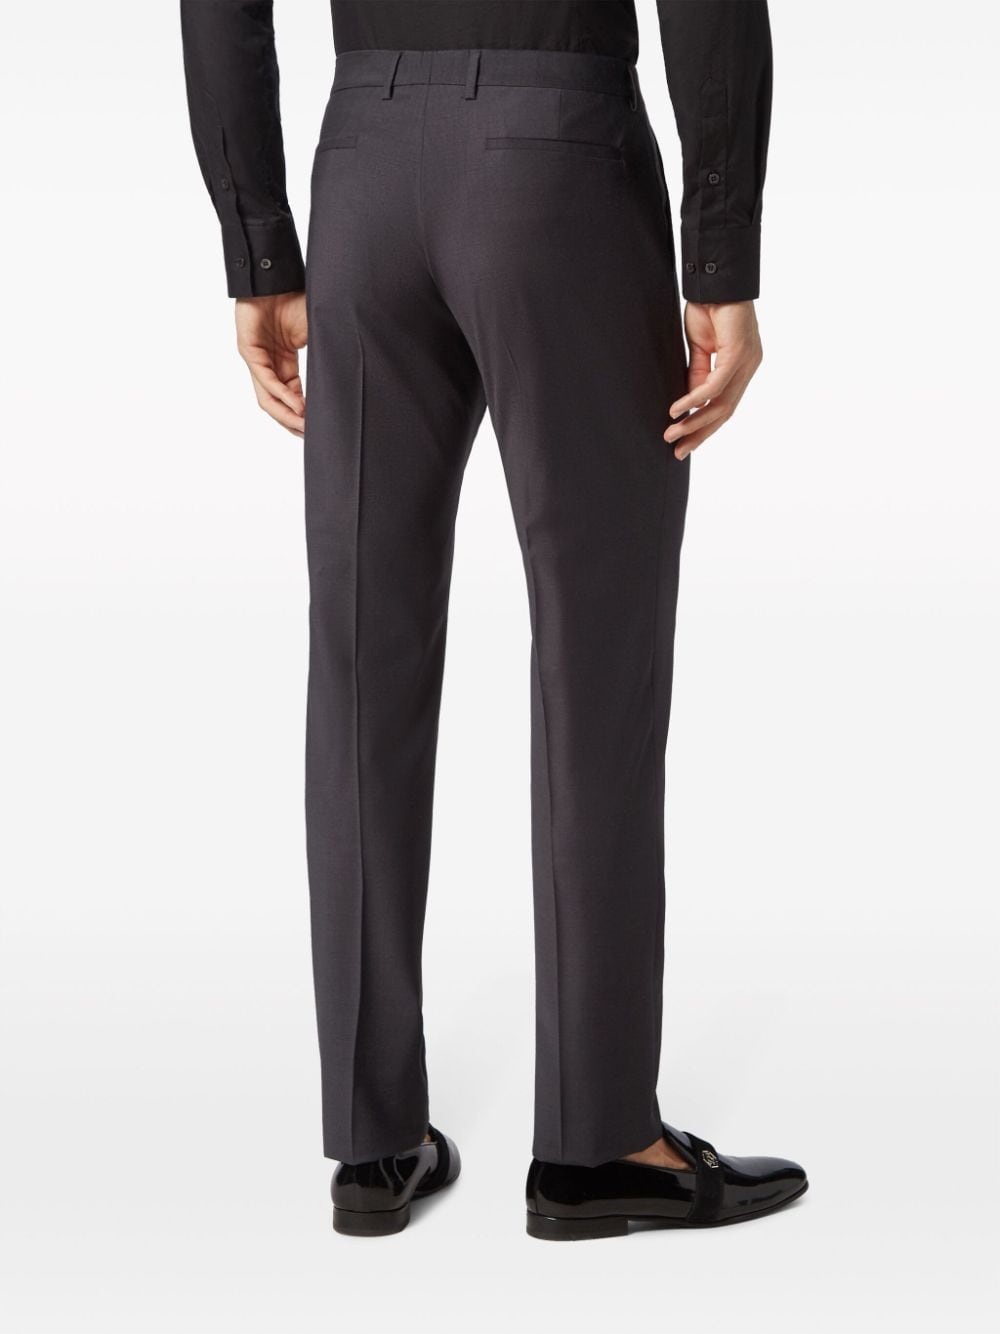 pressed-crease tailored trousers - 4